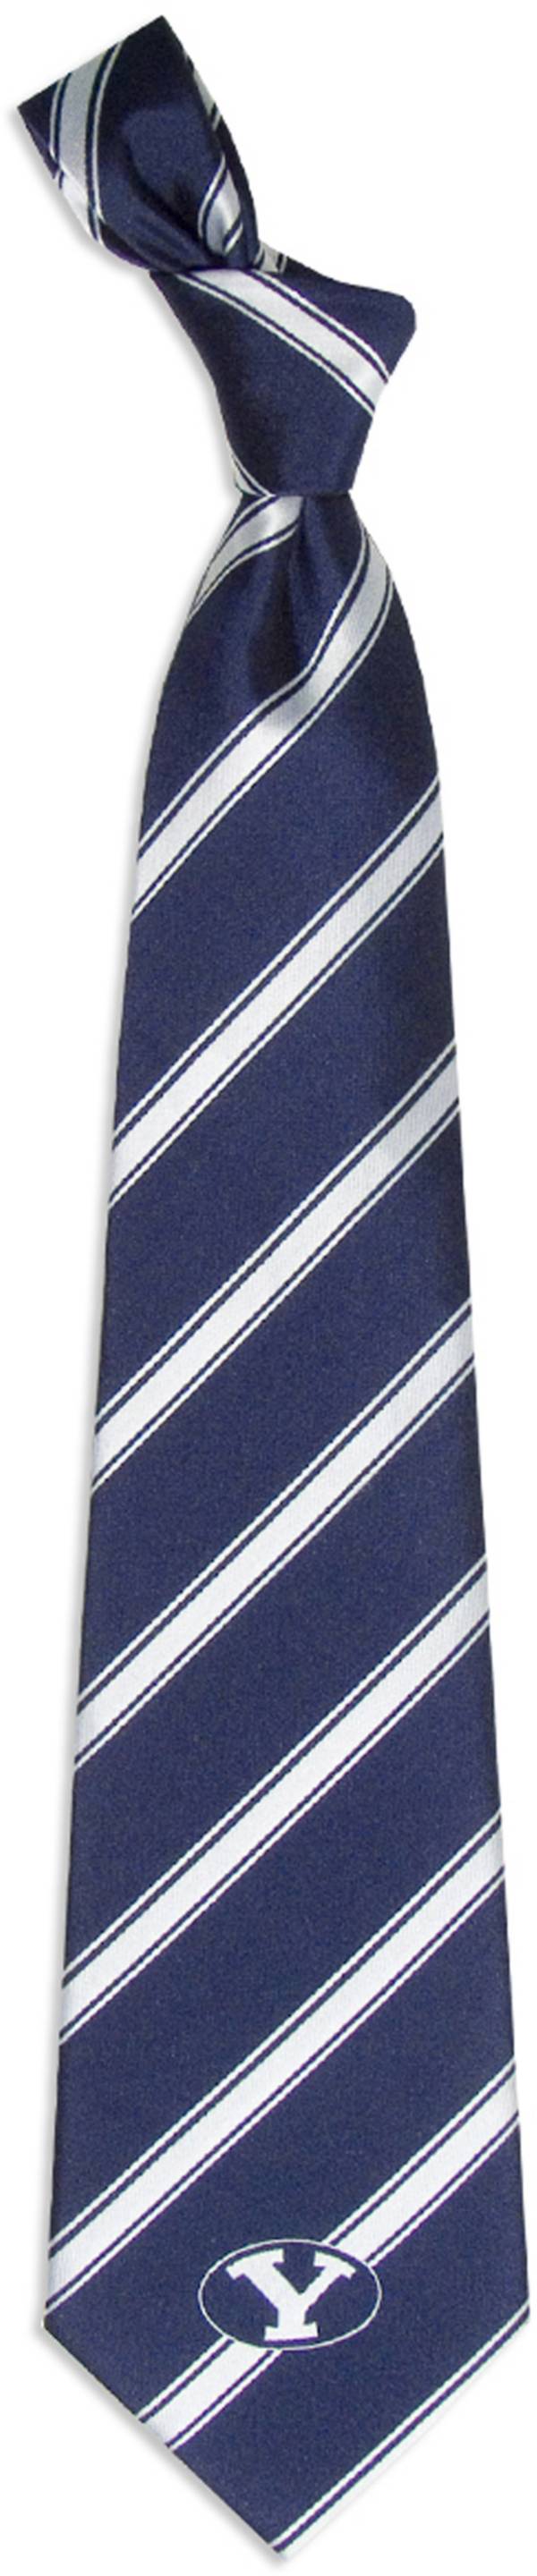 Eagles Wings BYU Cougars Woven Poly 1 Necktie product image